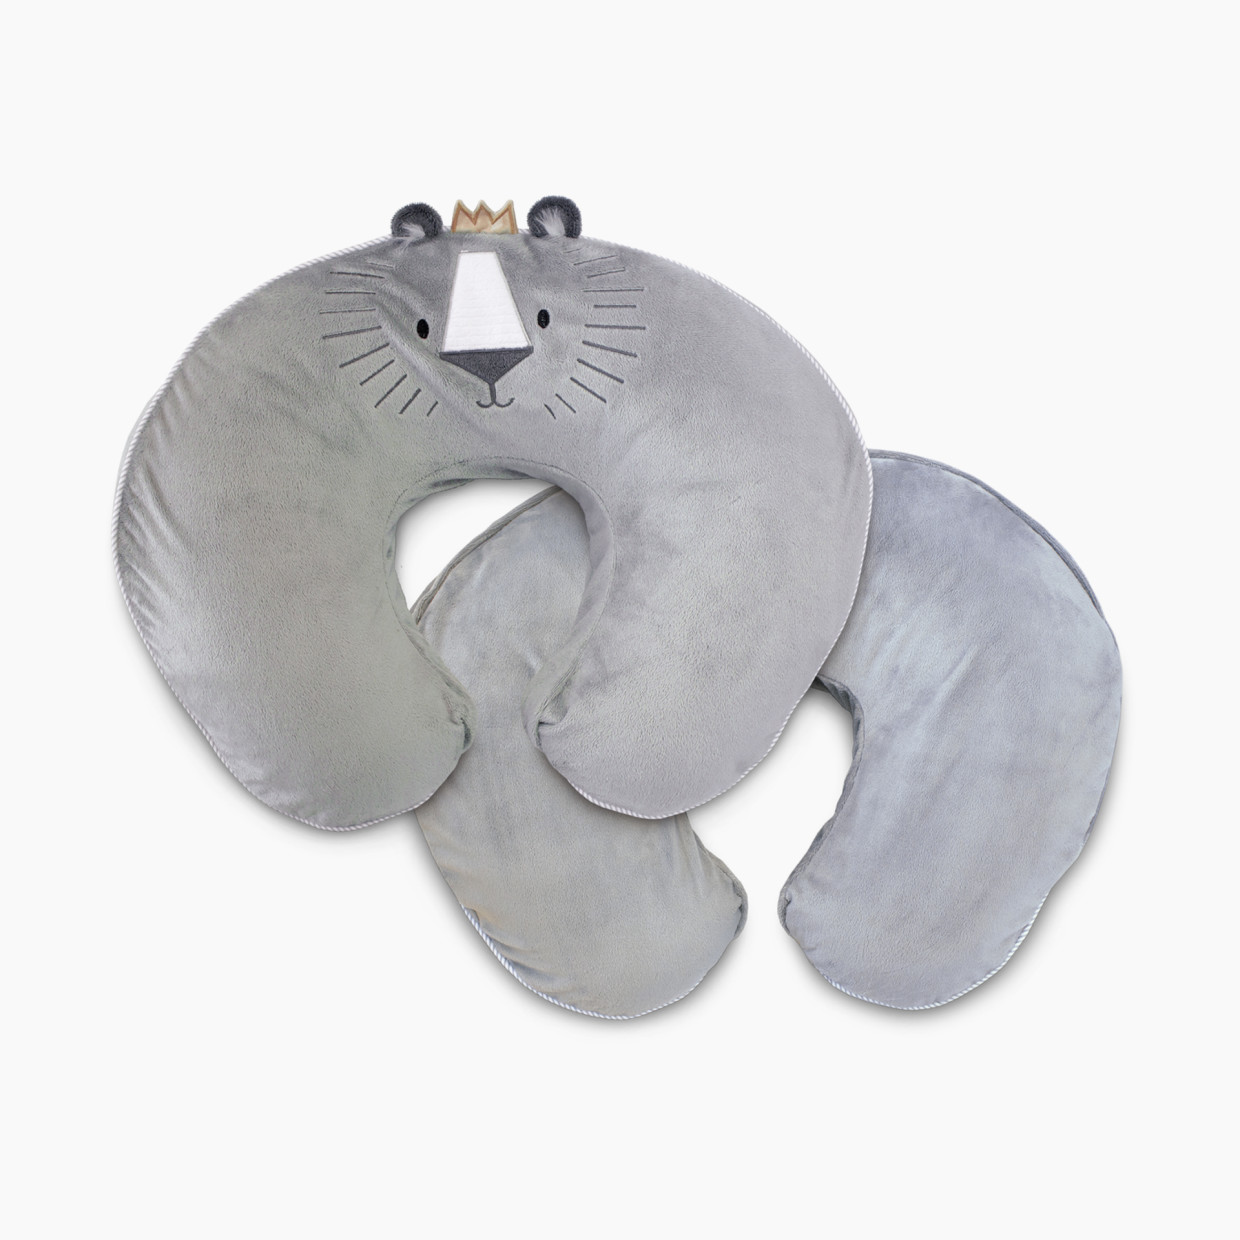 Boppy Luxe Support Nursing Pillow - Grey Royal Lion.